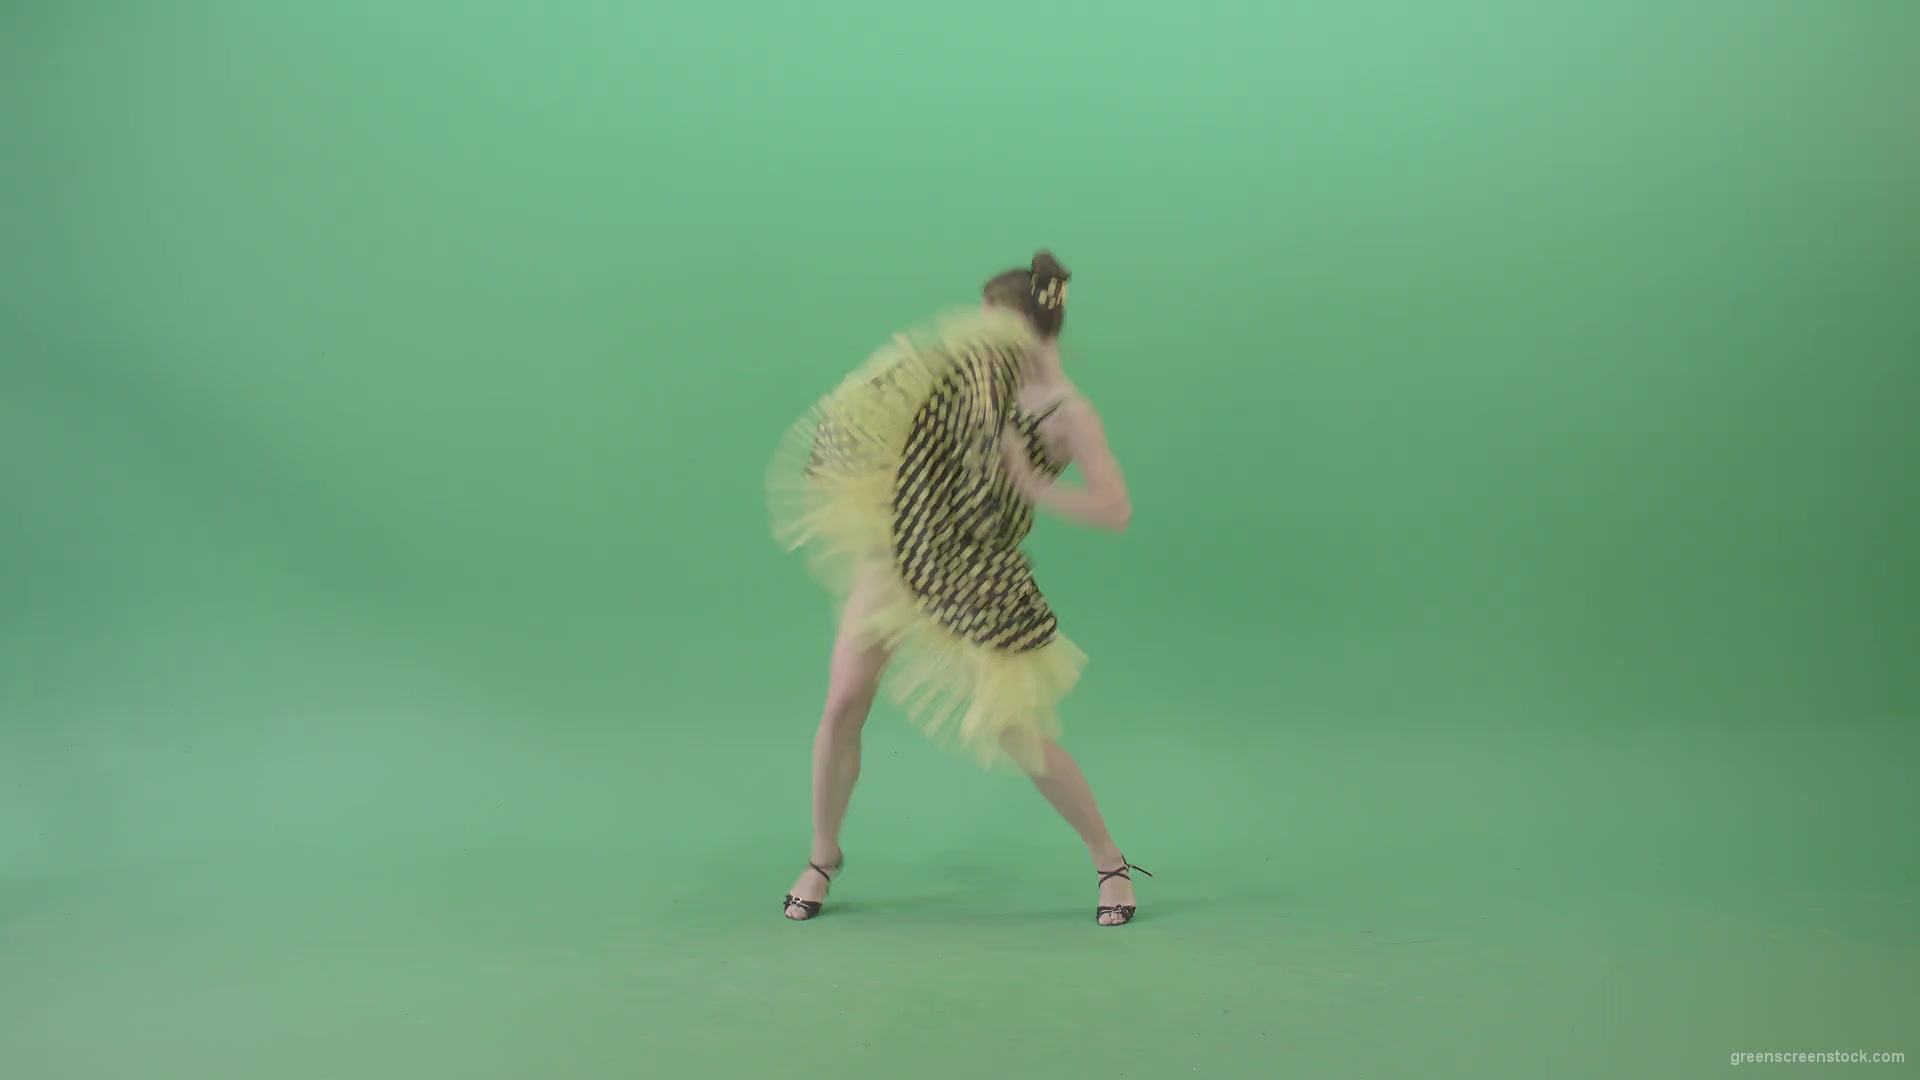 Happy-Woman-dancing-Rock-and-Roll-Jazz-Swing-Boogie-woogie-isolated-on-Green-Screen-4K-Video-Footage-1920_001 Green Screen Stock